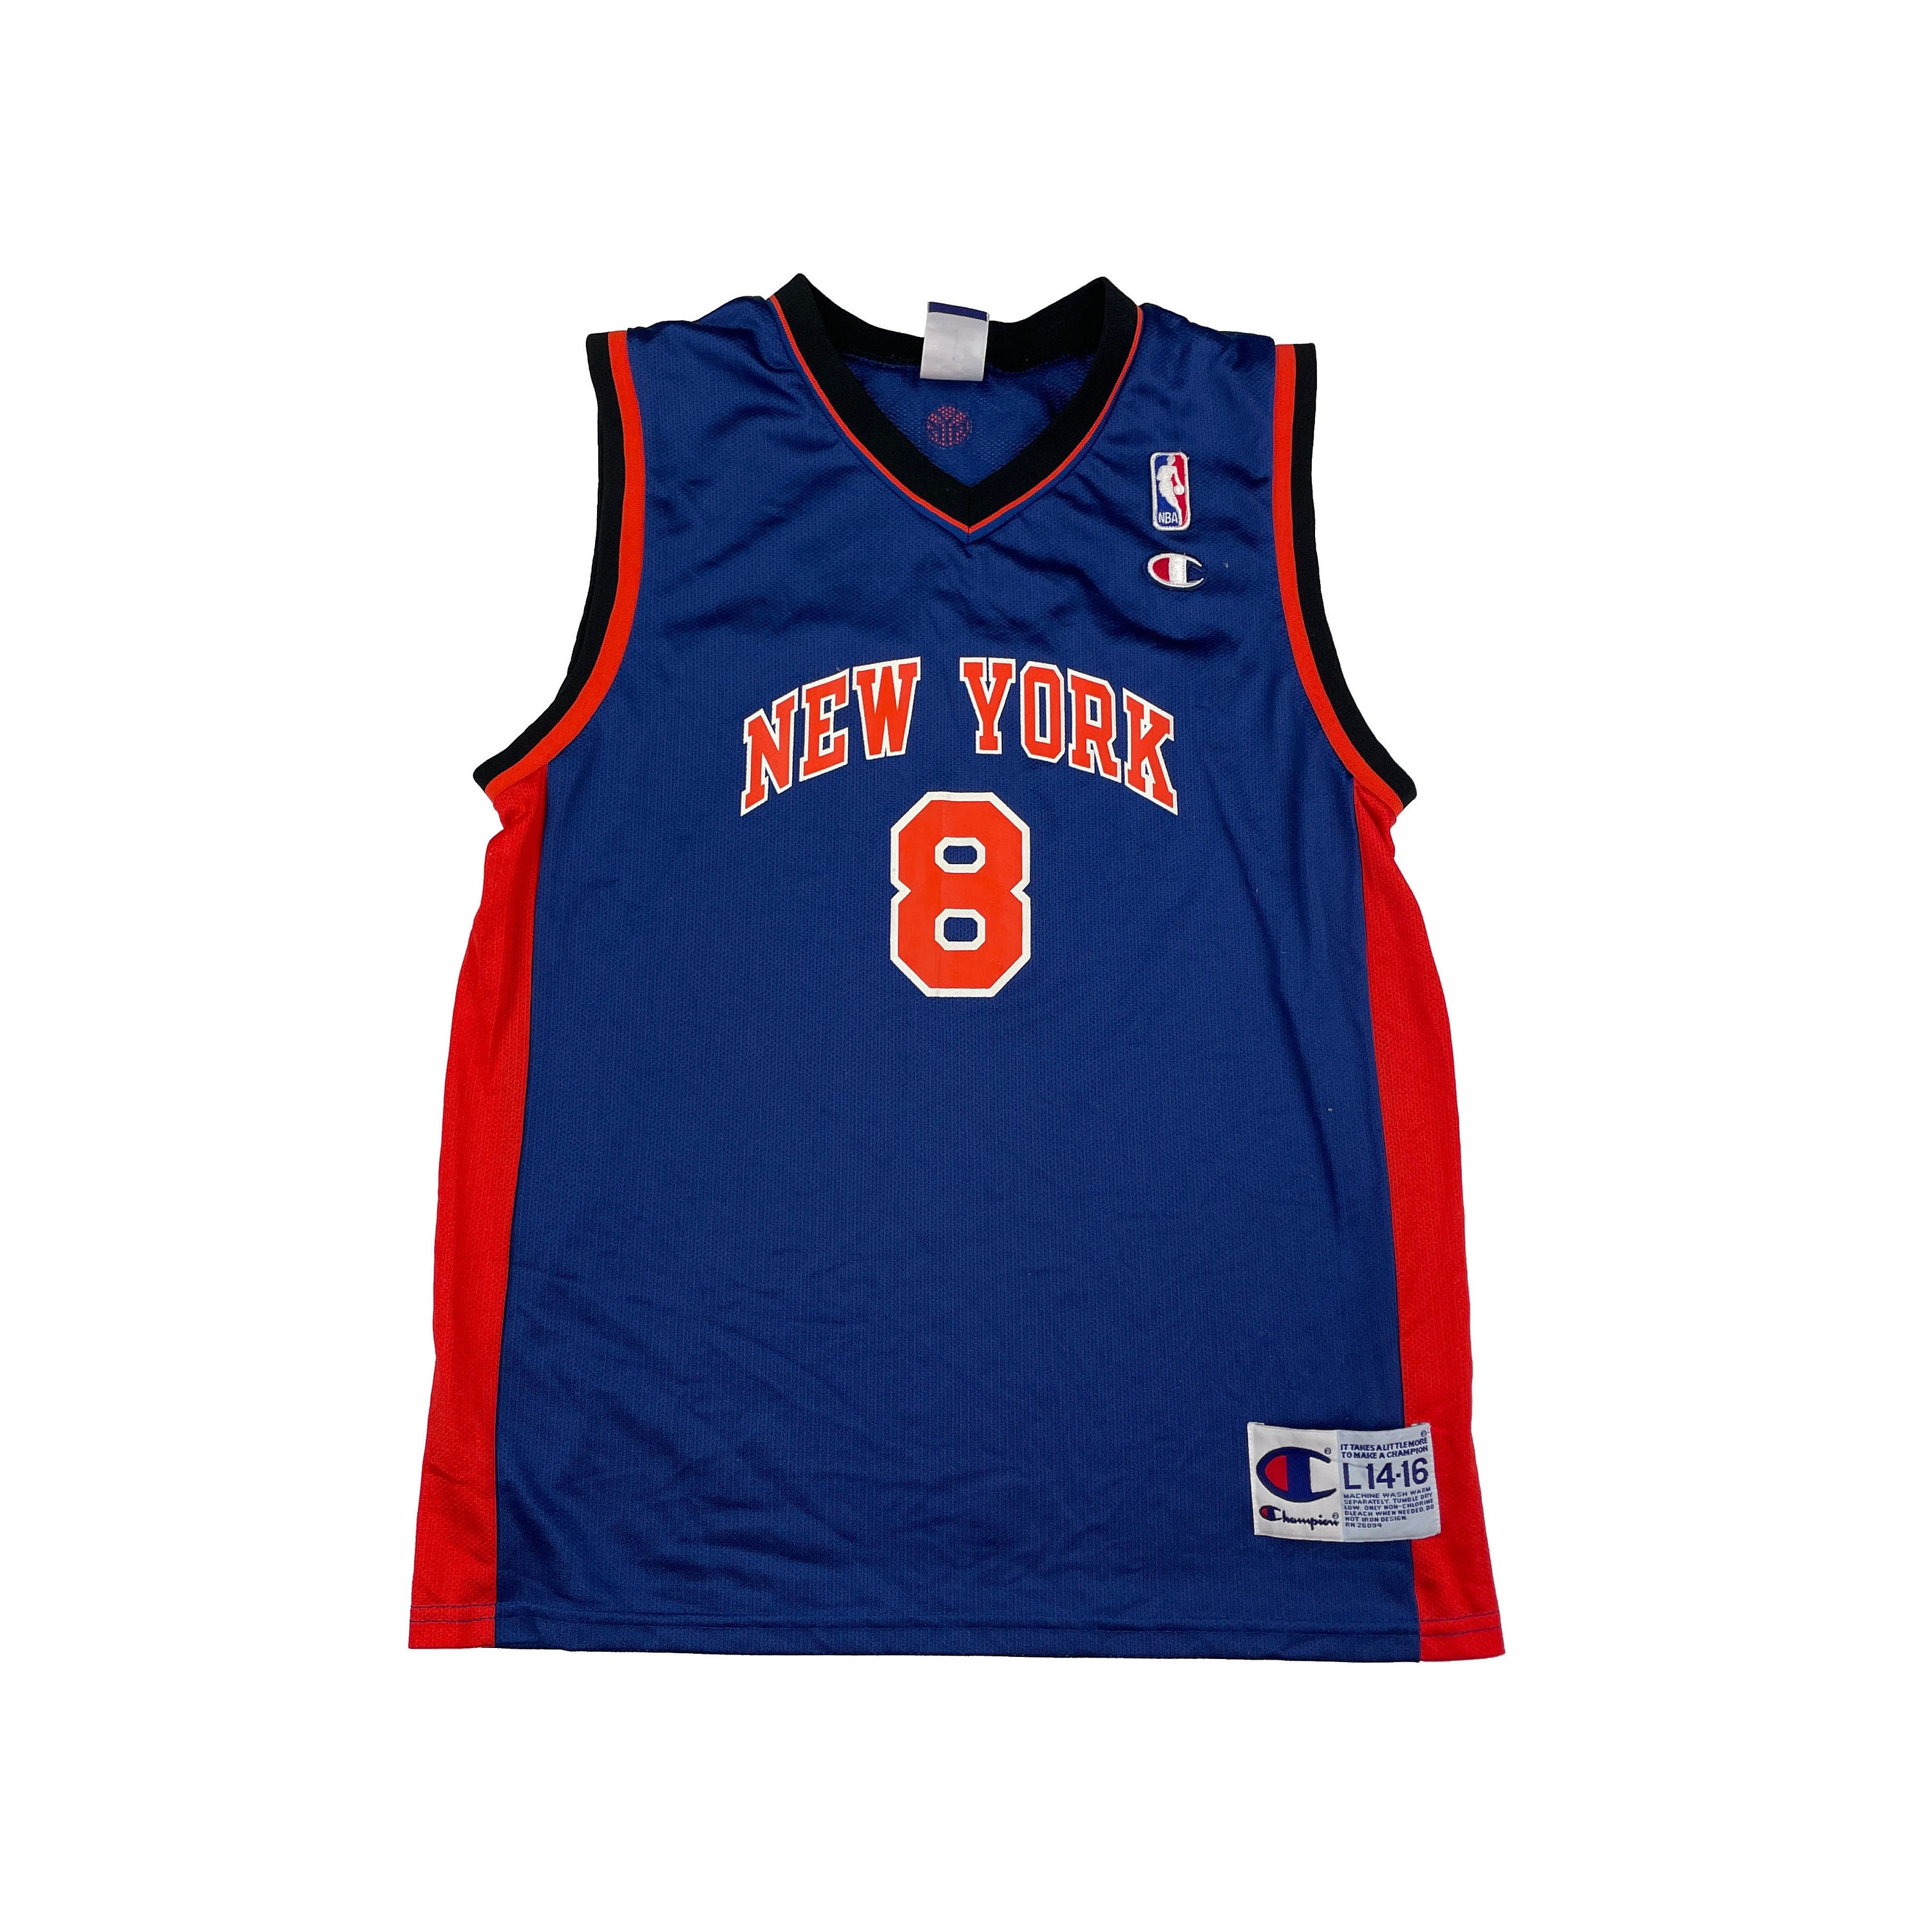 Complete NEW YORK KNICKS Outfit Lot W/ Sprewell NBA CHAMPION